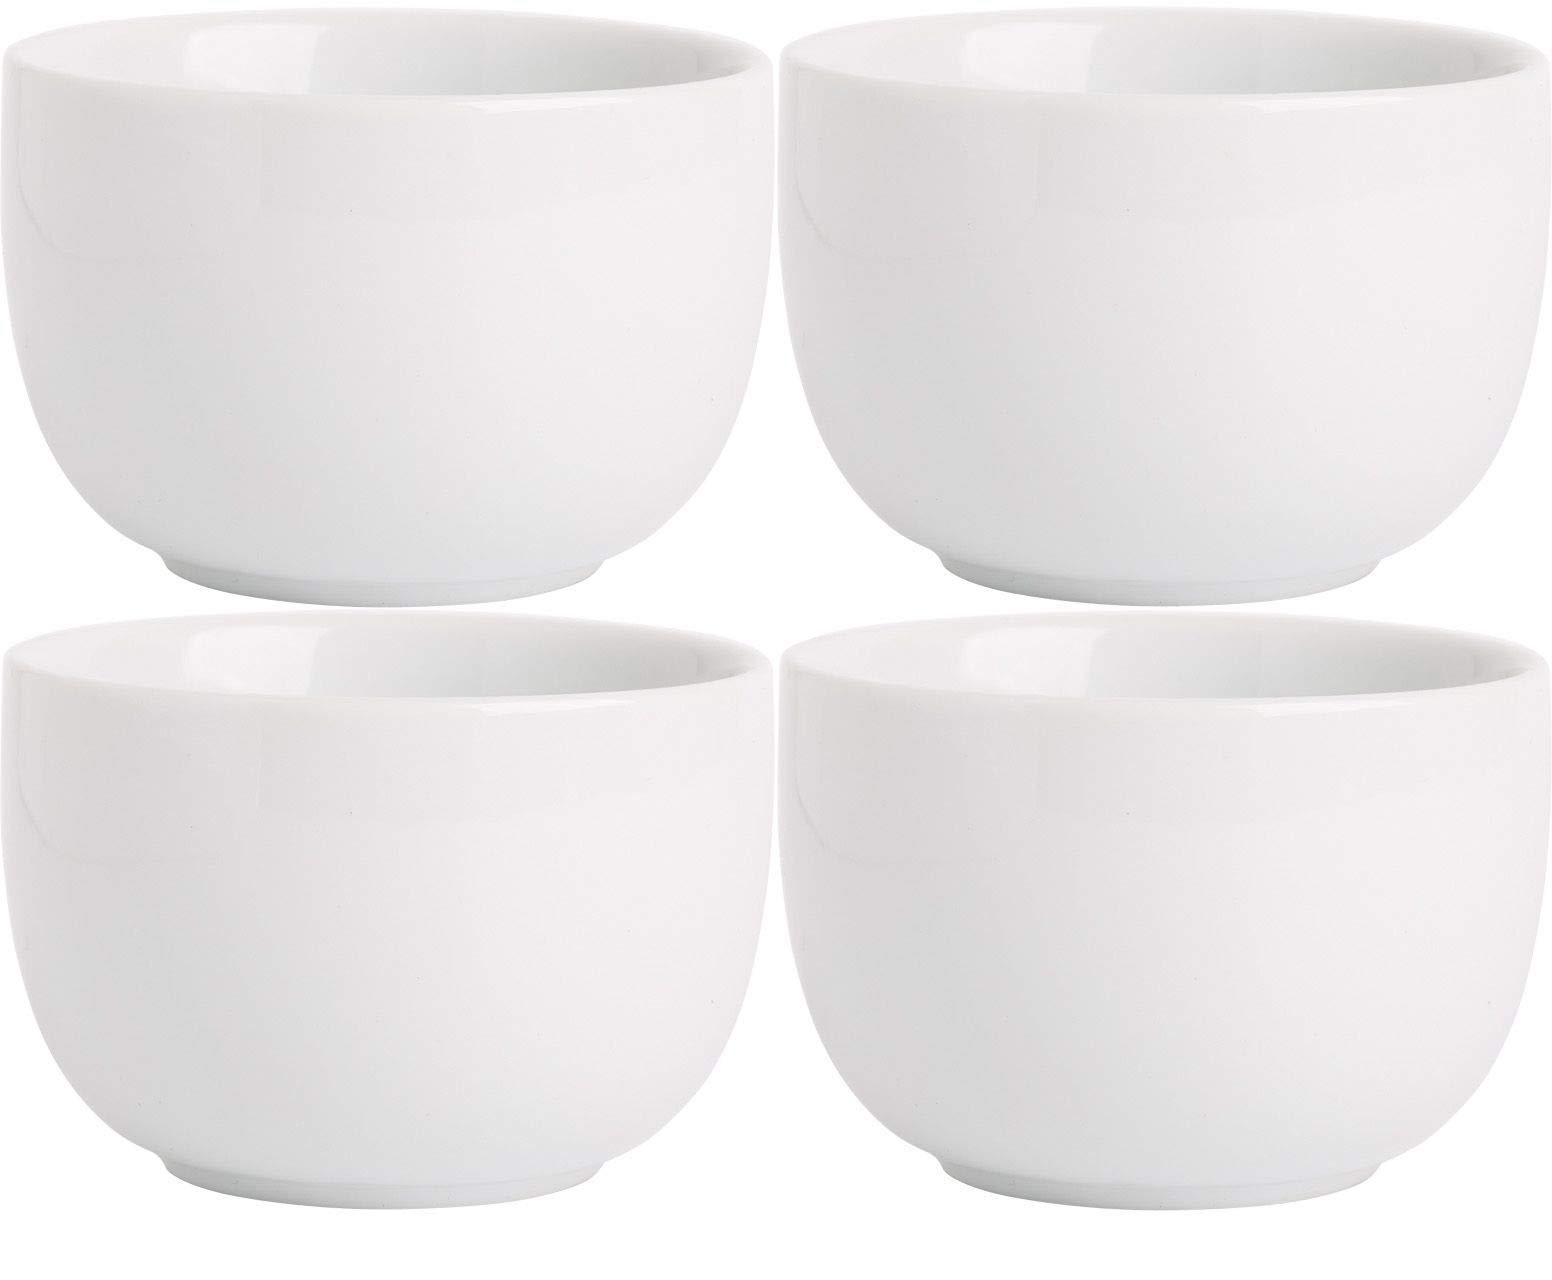 Home Essentials 15237 Fiddle and Fern Round Bowl Mini Taster, Set of 4, 3-inch Long